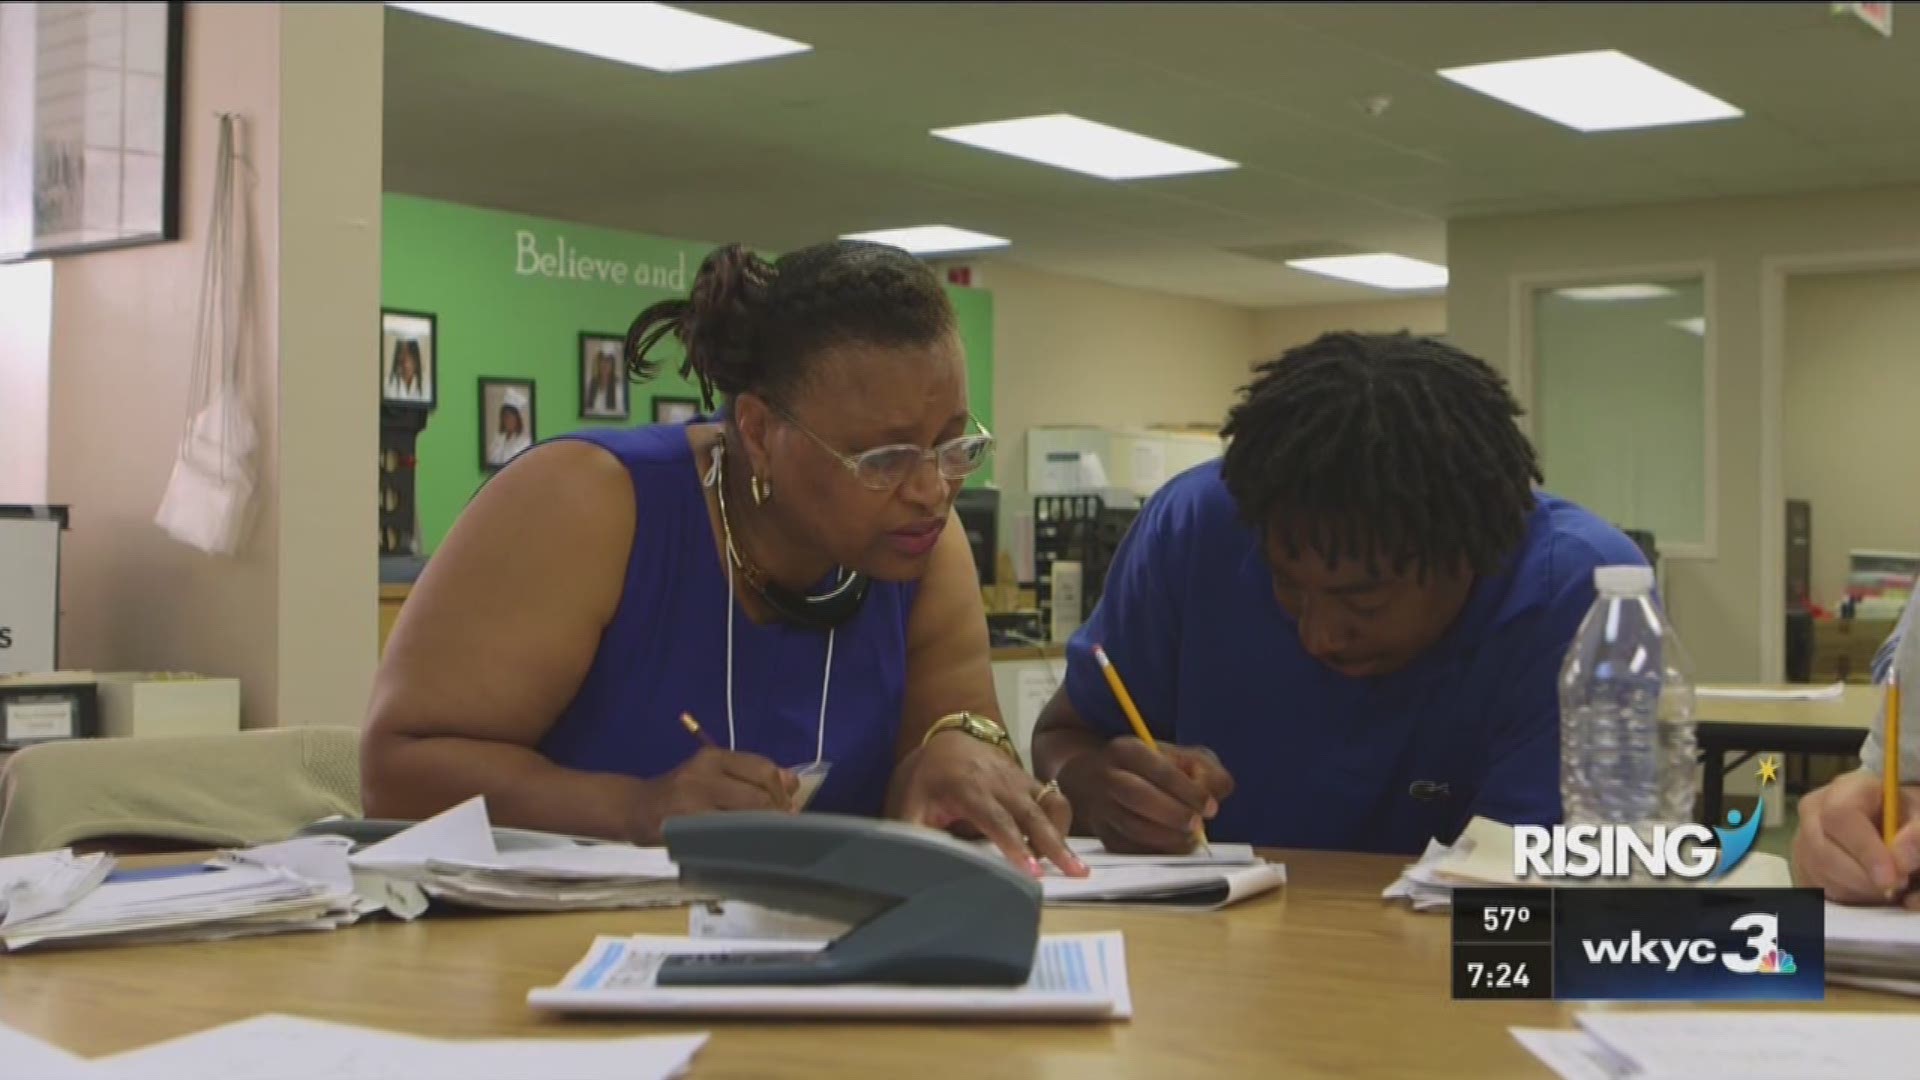 At 45 years-old Margo Hudson was making $7.25 an hour cleaning planes. That's when she decided to change her life. Rising shows how she went from high school dropout to the recipient of multiple national and state awards for education.